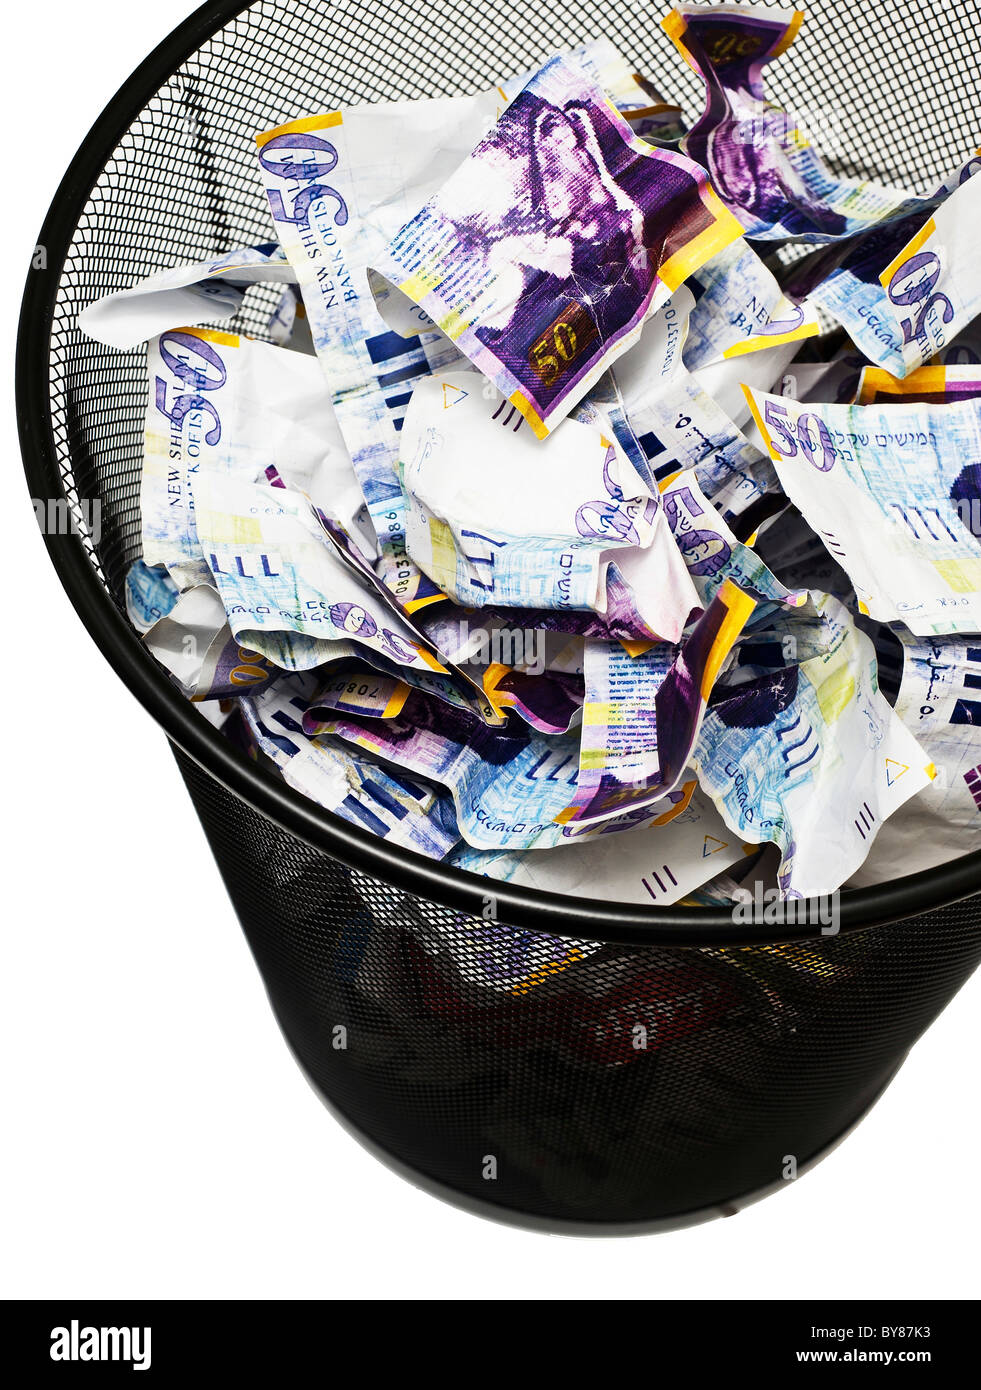 Banknotes in a waste paper basket On white Background Stock Photo